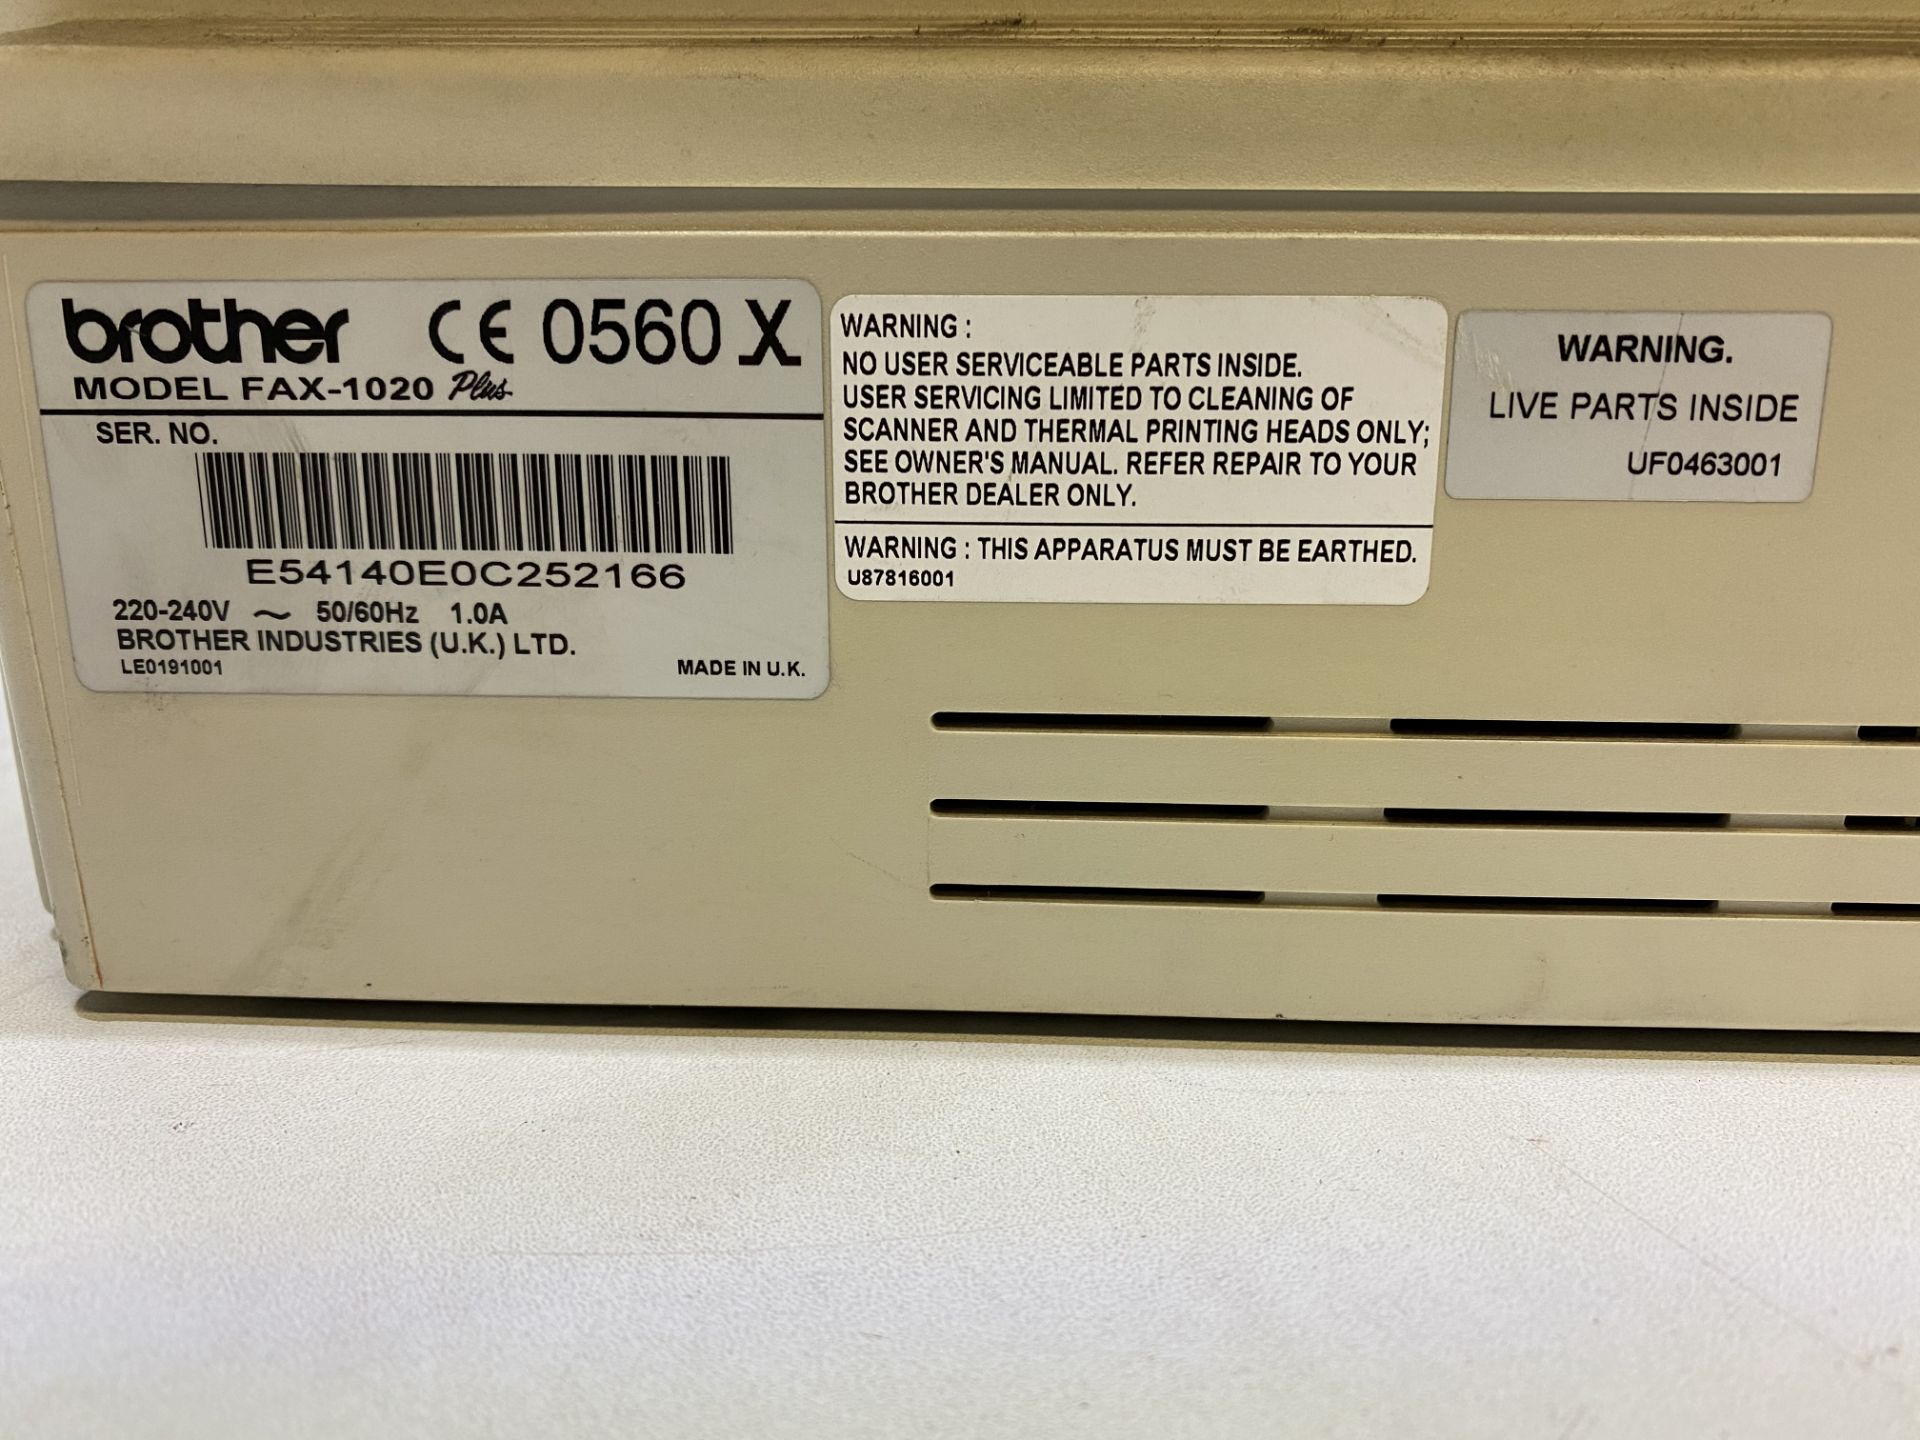 Brother FAX-1020 Plus Fax Machine - Image 7 of 7